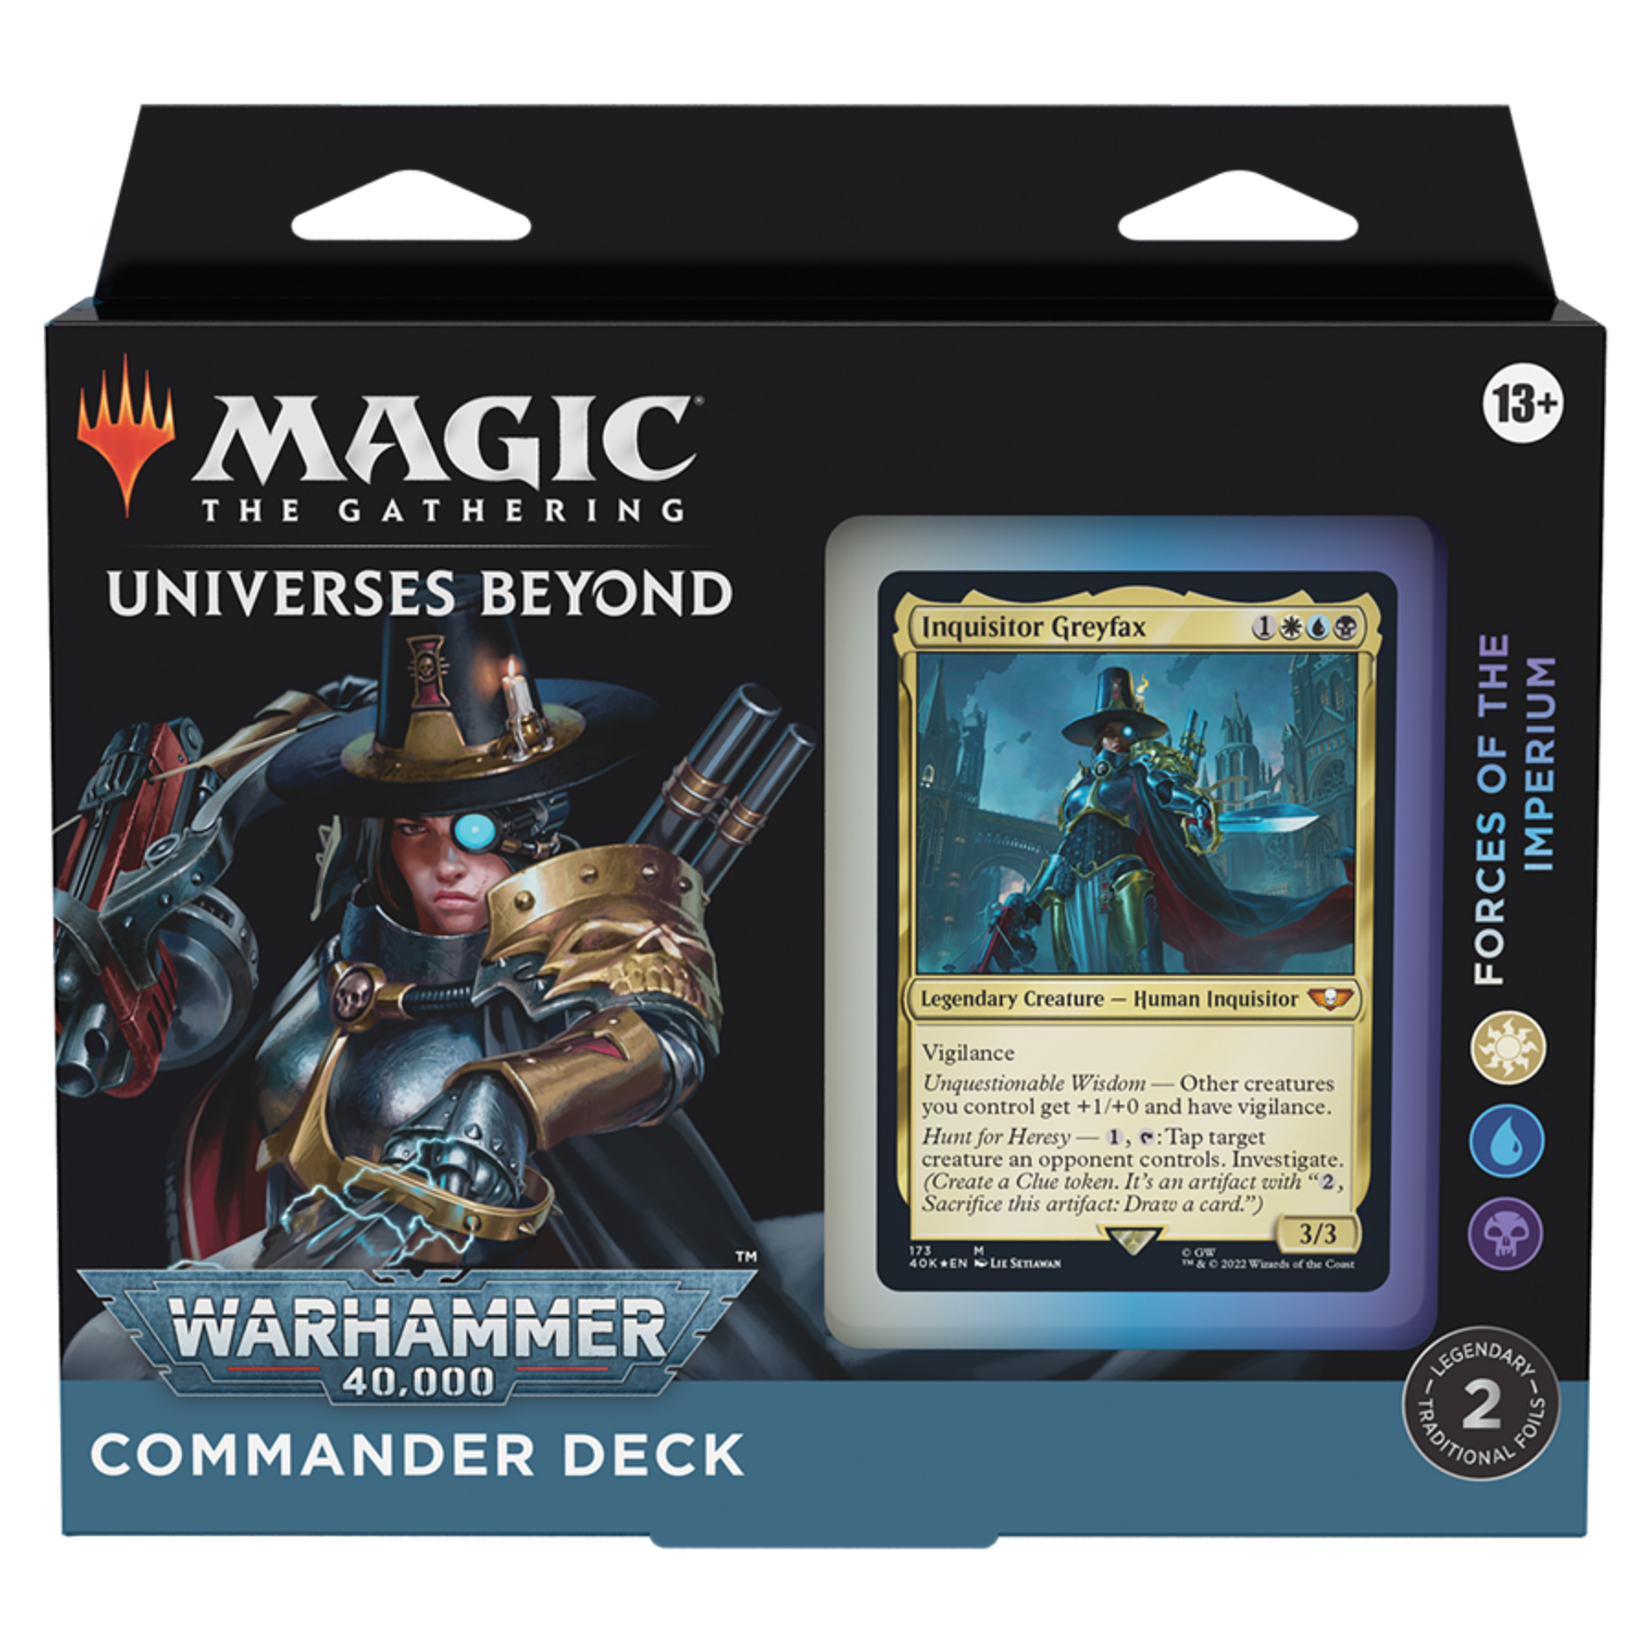 Wizards of the Coast Magic - Warhammer 40,000 Commander Deck - Forces of the Imperium (White Blue Black)